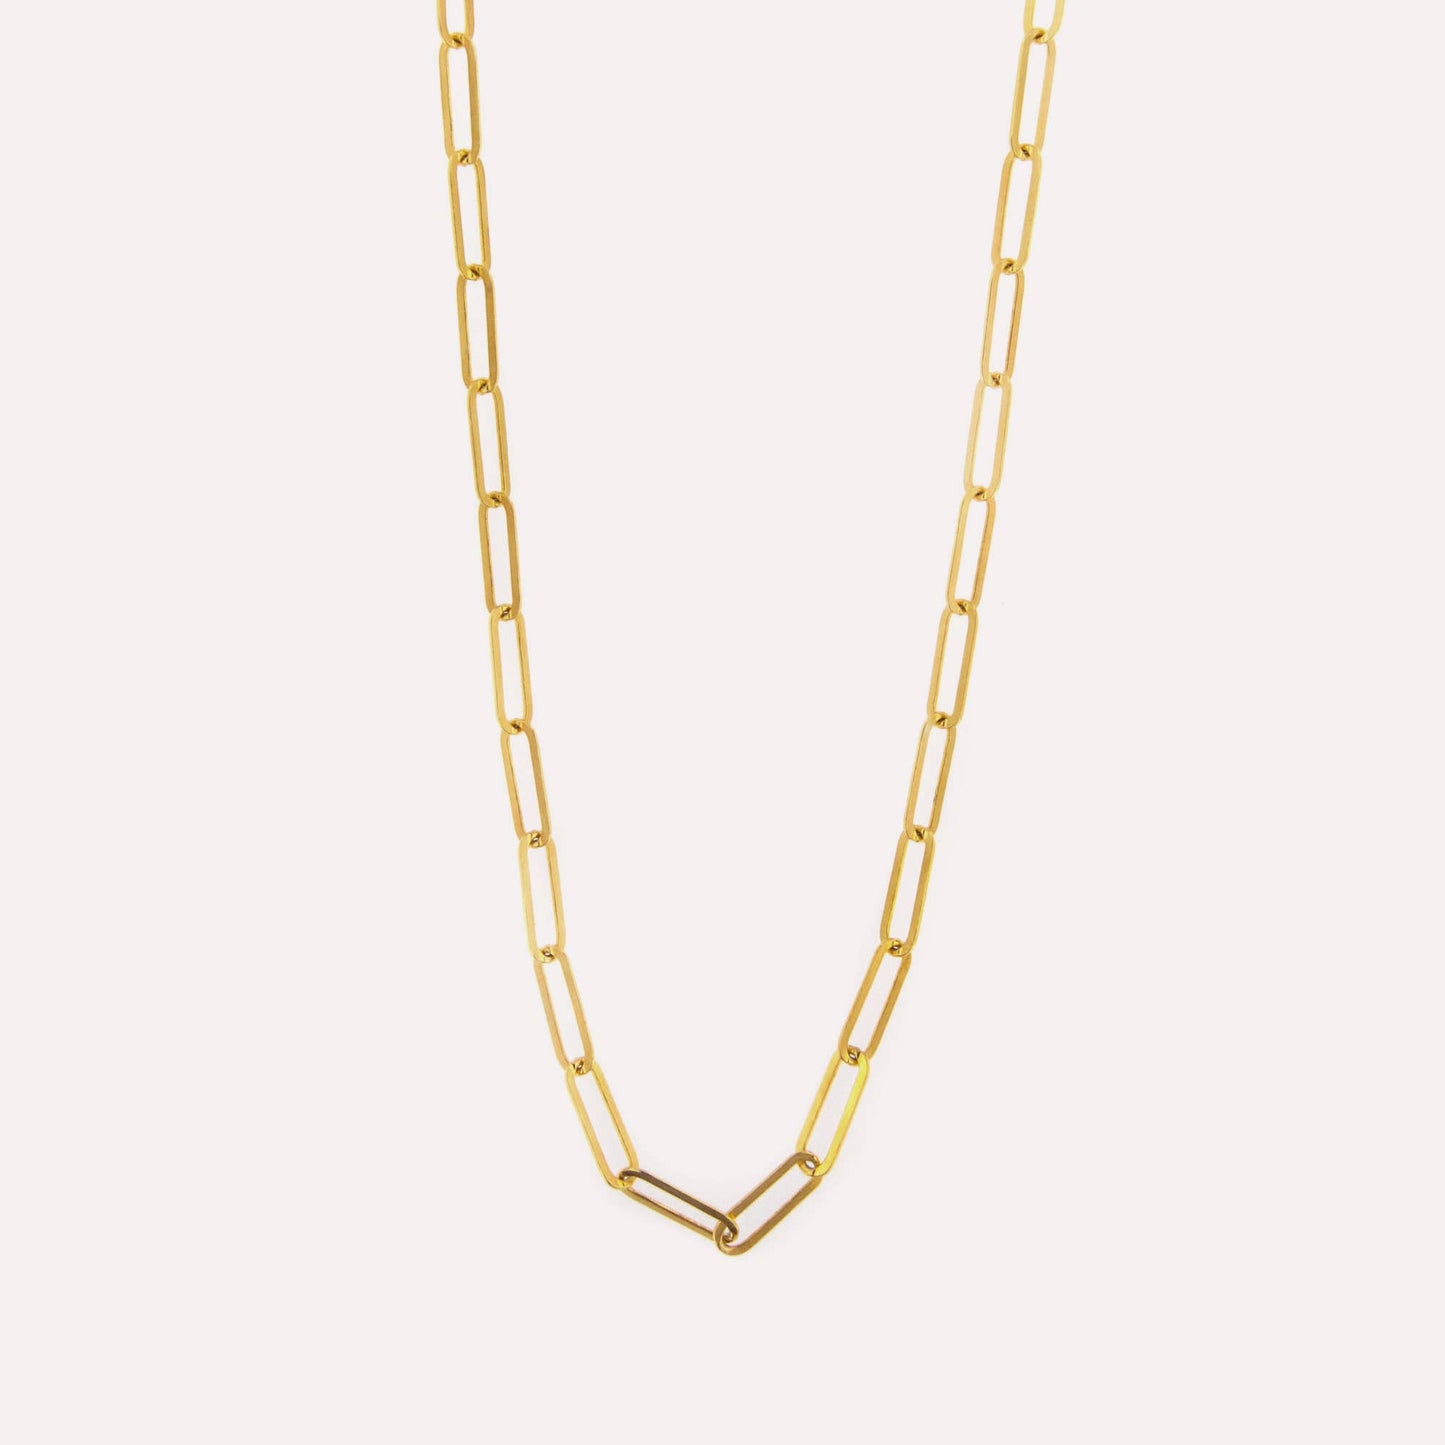 Golden Clips Necklace S